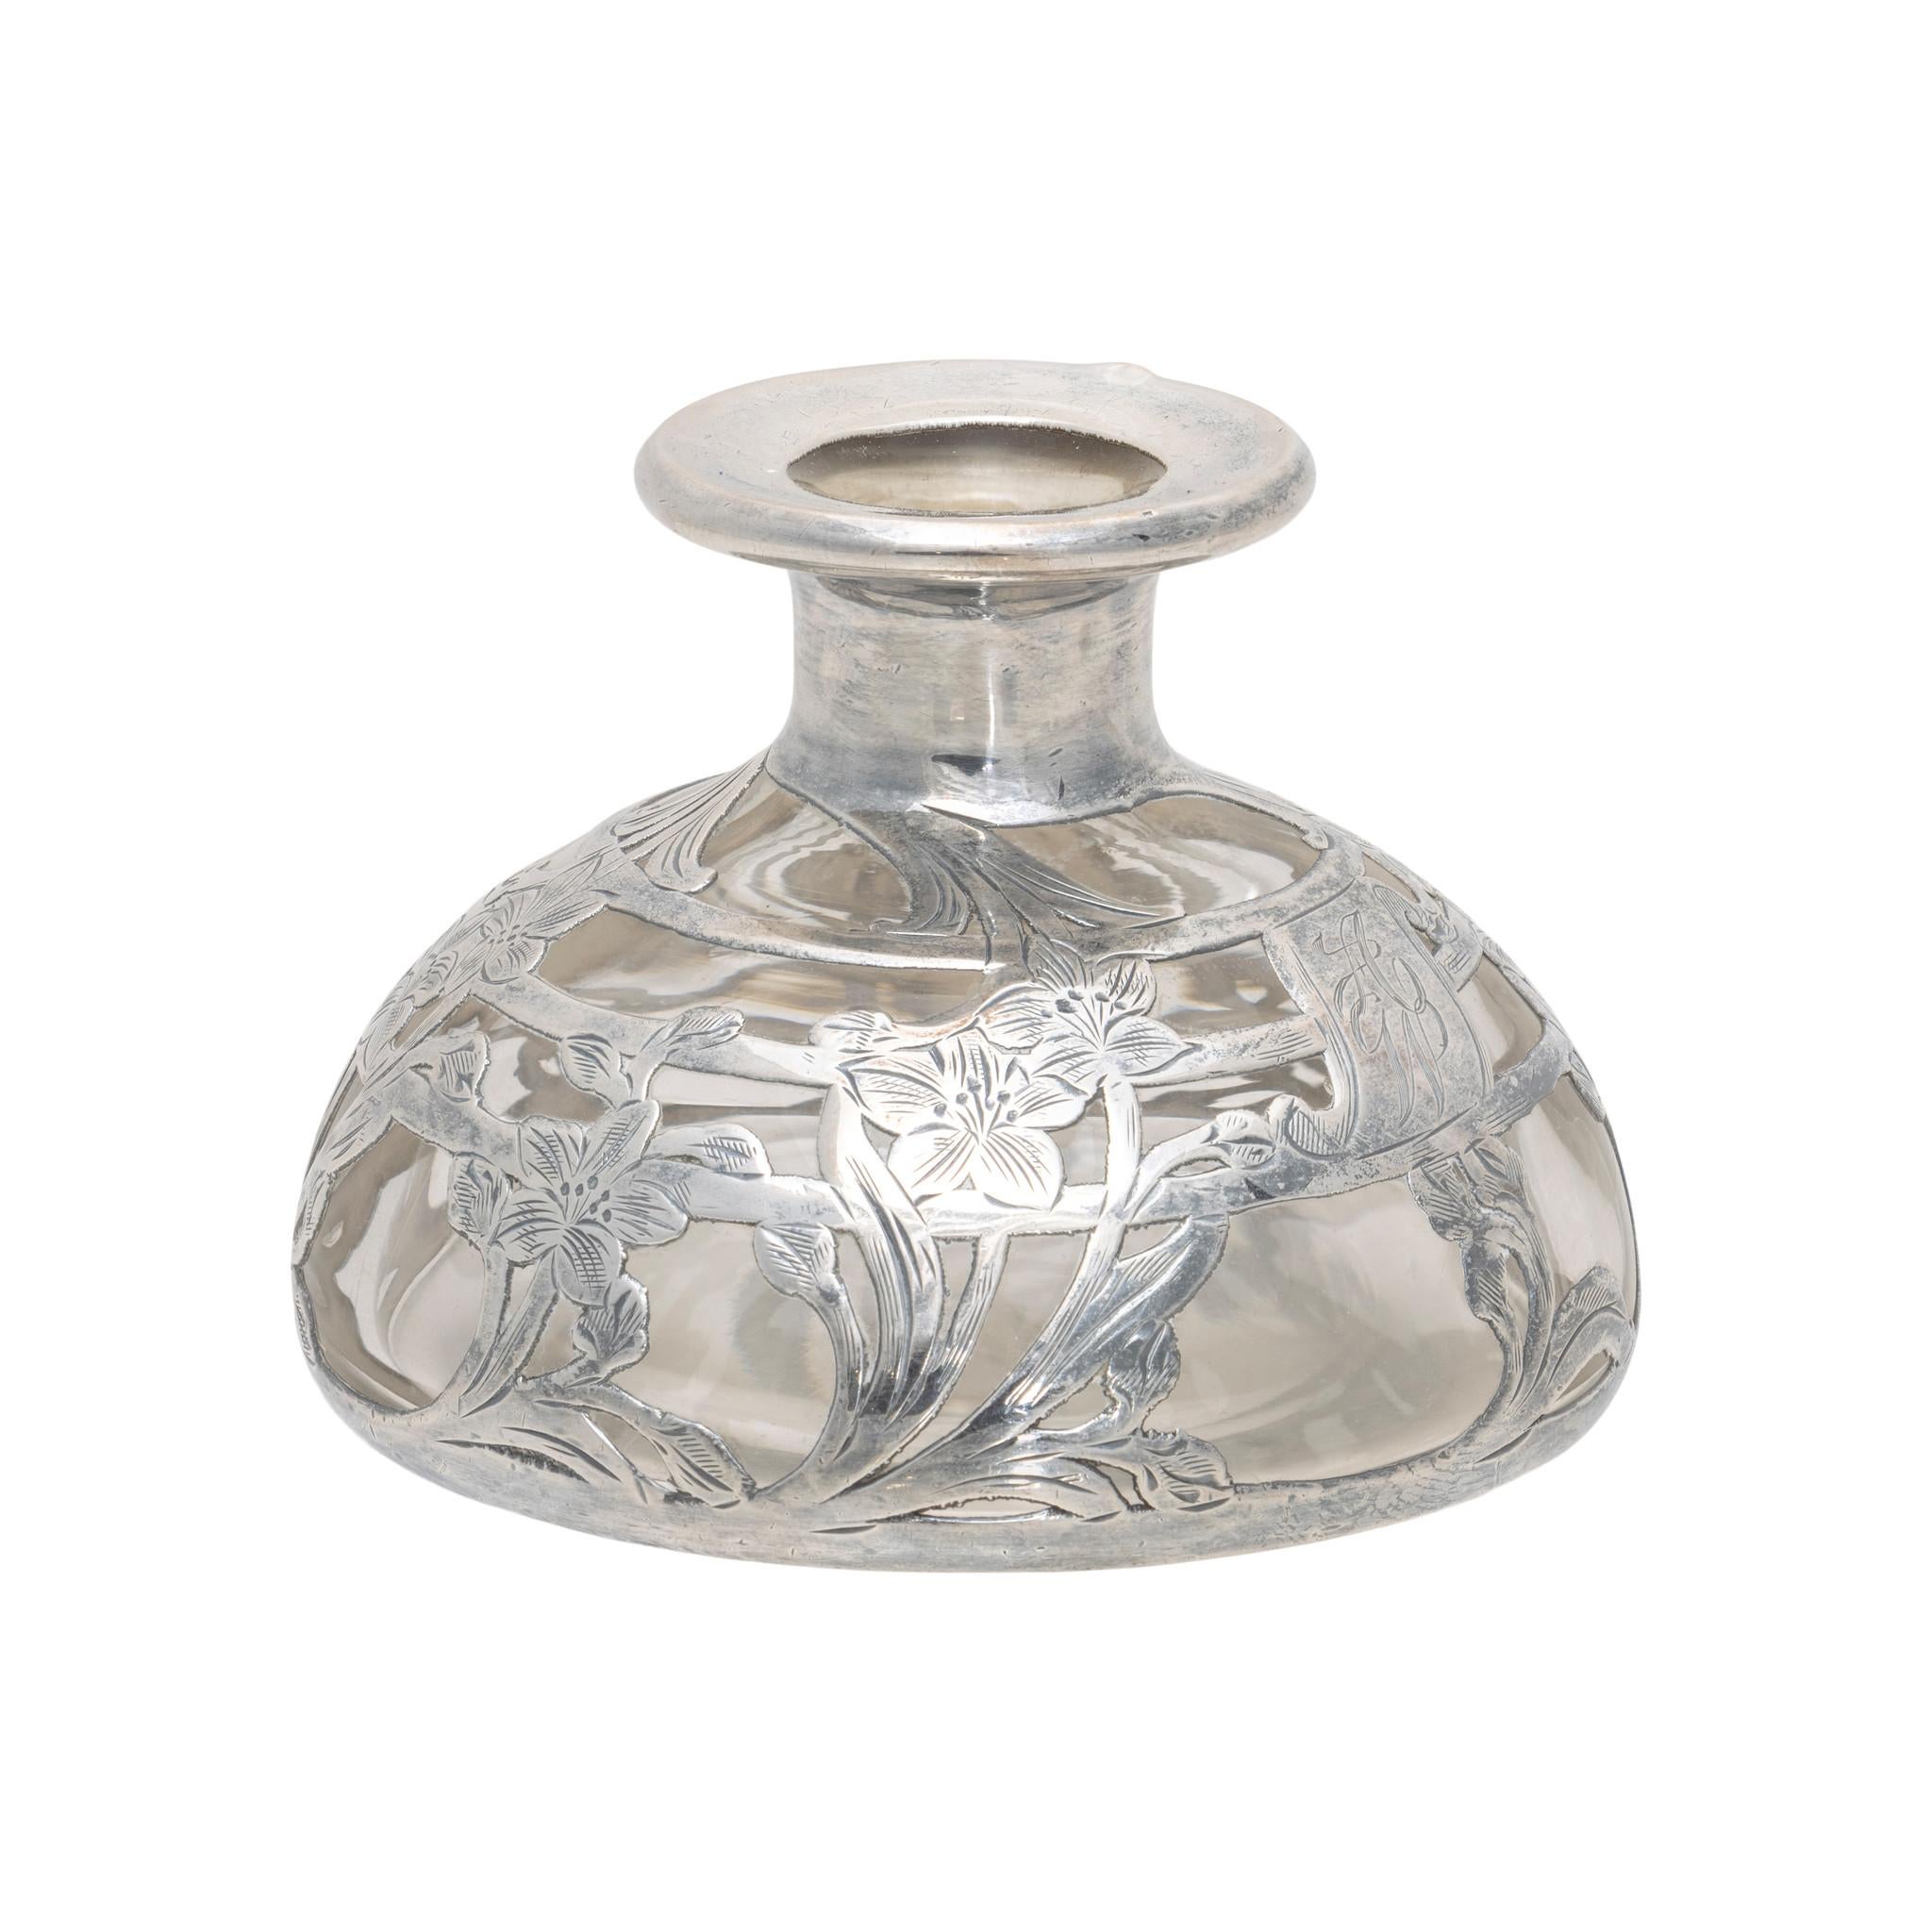 Alvin silver overlay glass perfume bottle. With clear glass and art nouveau style silverwork, featuring 7 bouquets of daffodil or narcissus flowers with complementary design on stopper. Center has monogrammed letters 